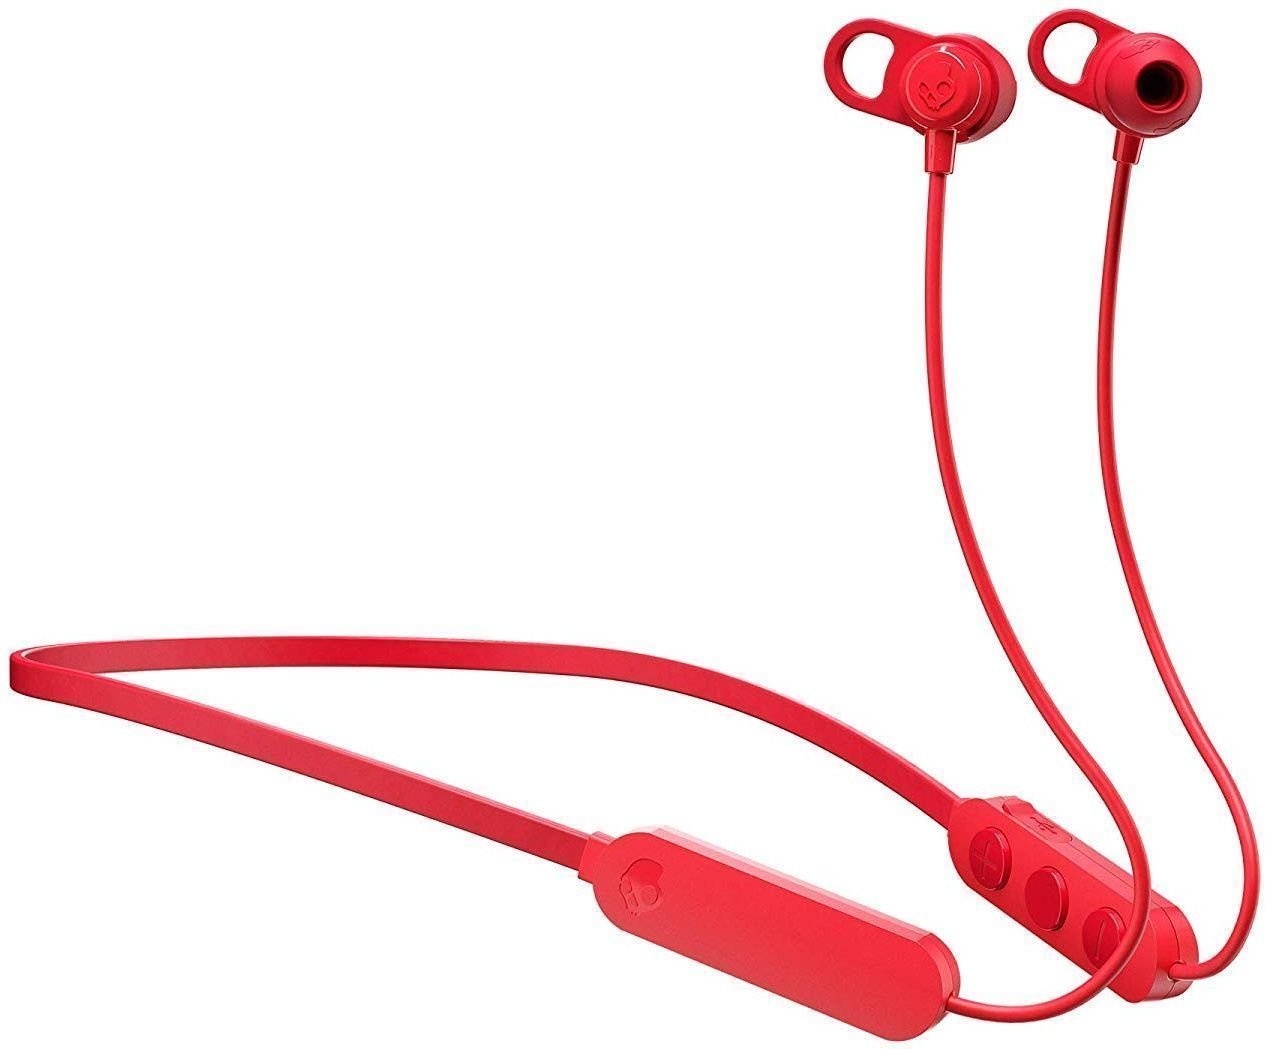 Auriculares intrauditivos inalámbricos Skullcandy JIB Plus Wireless Earbuds Red